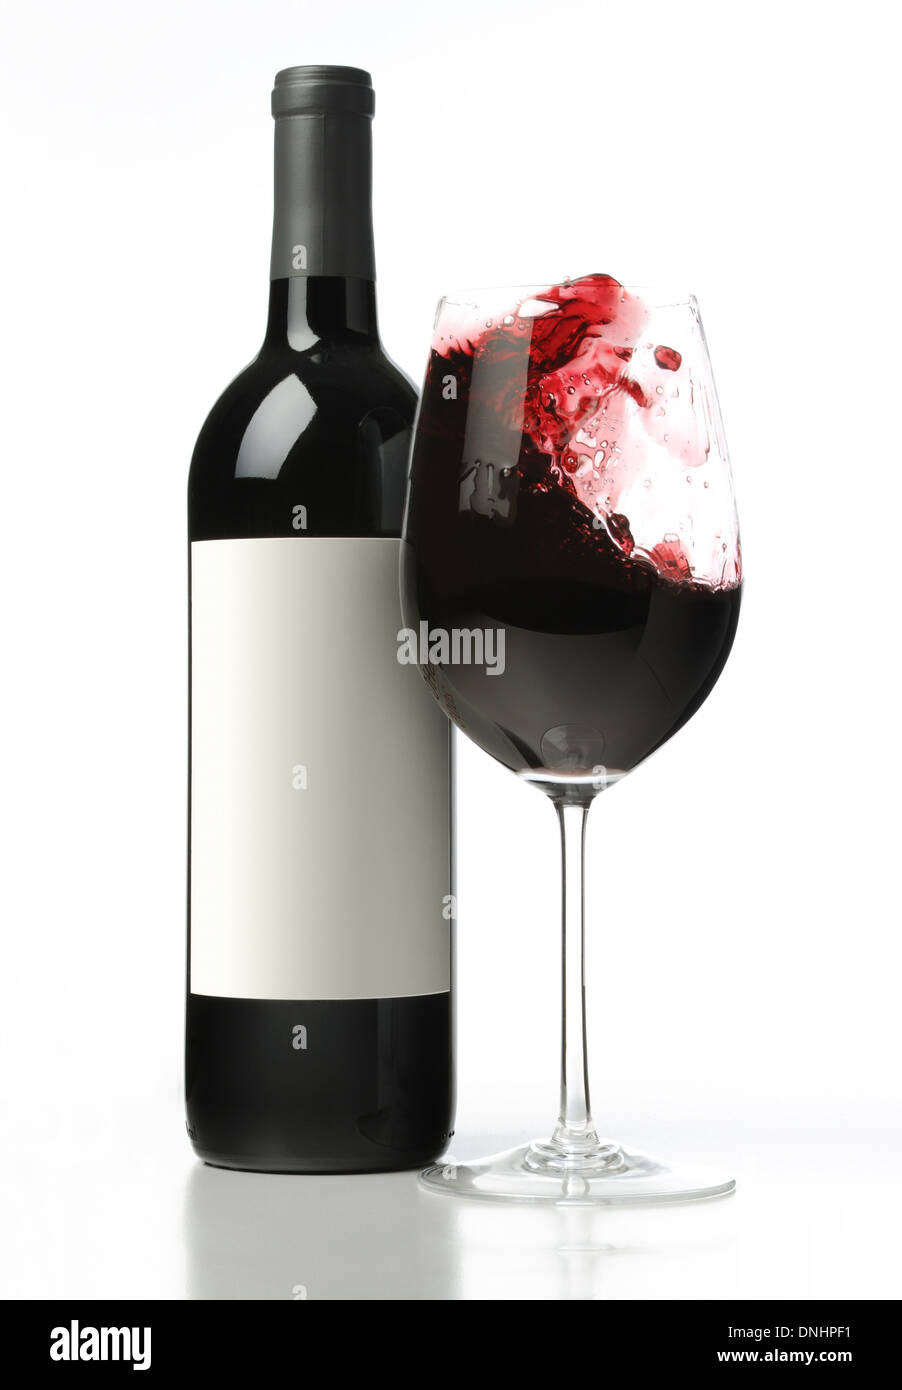 A bottle of red wine with a splashing glass of red wine. Stock Photo